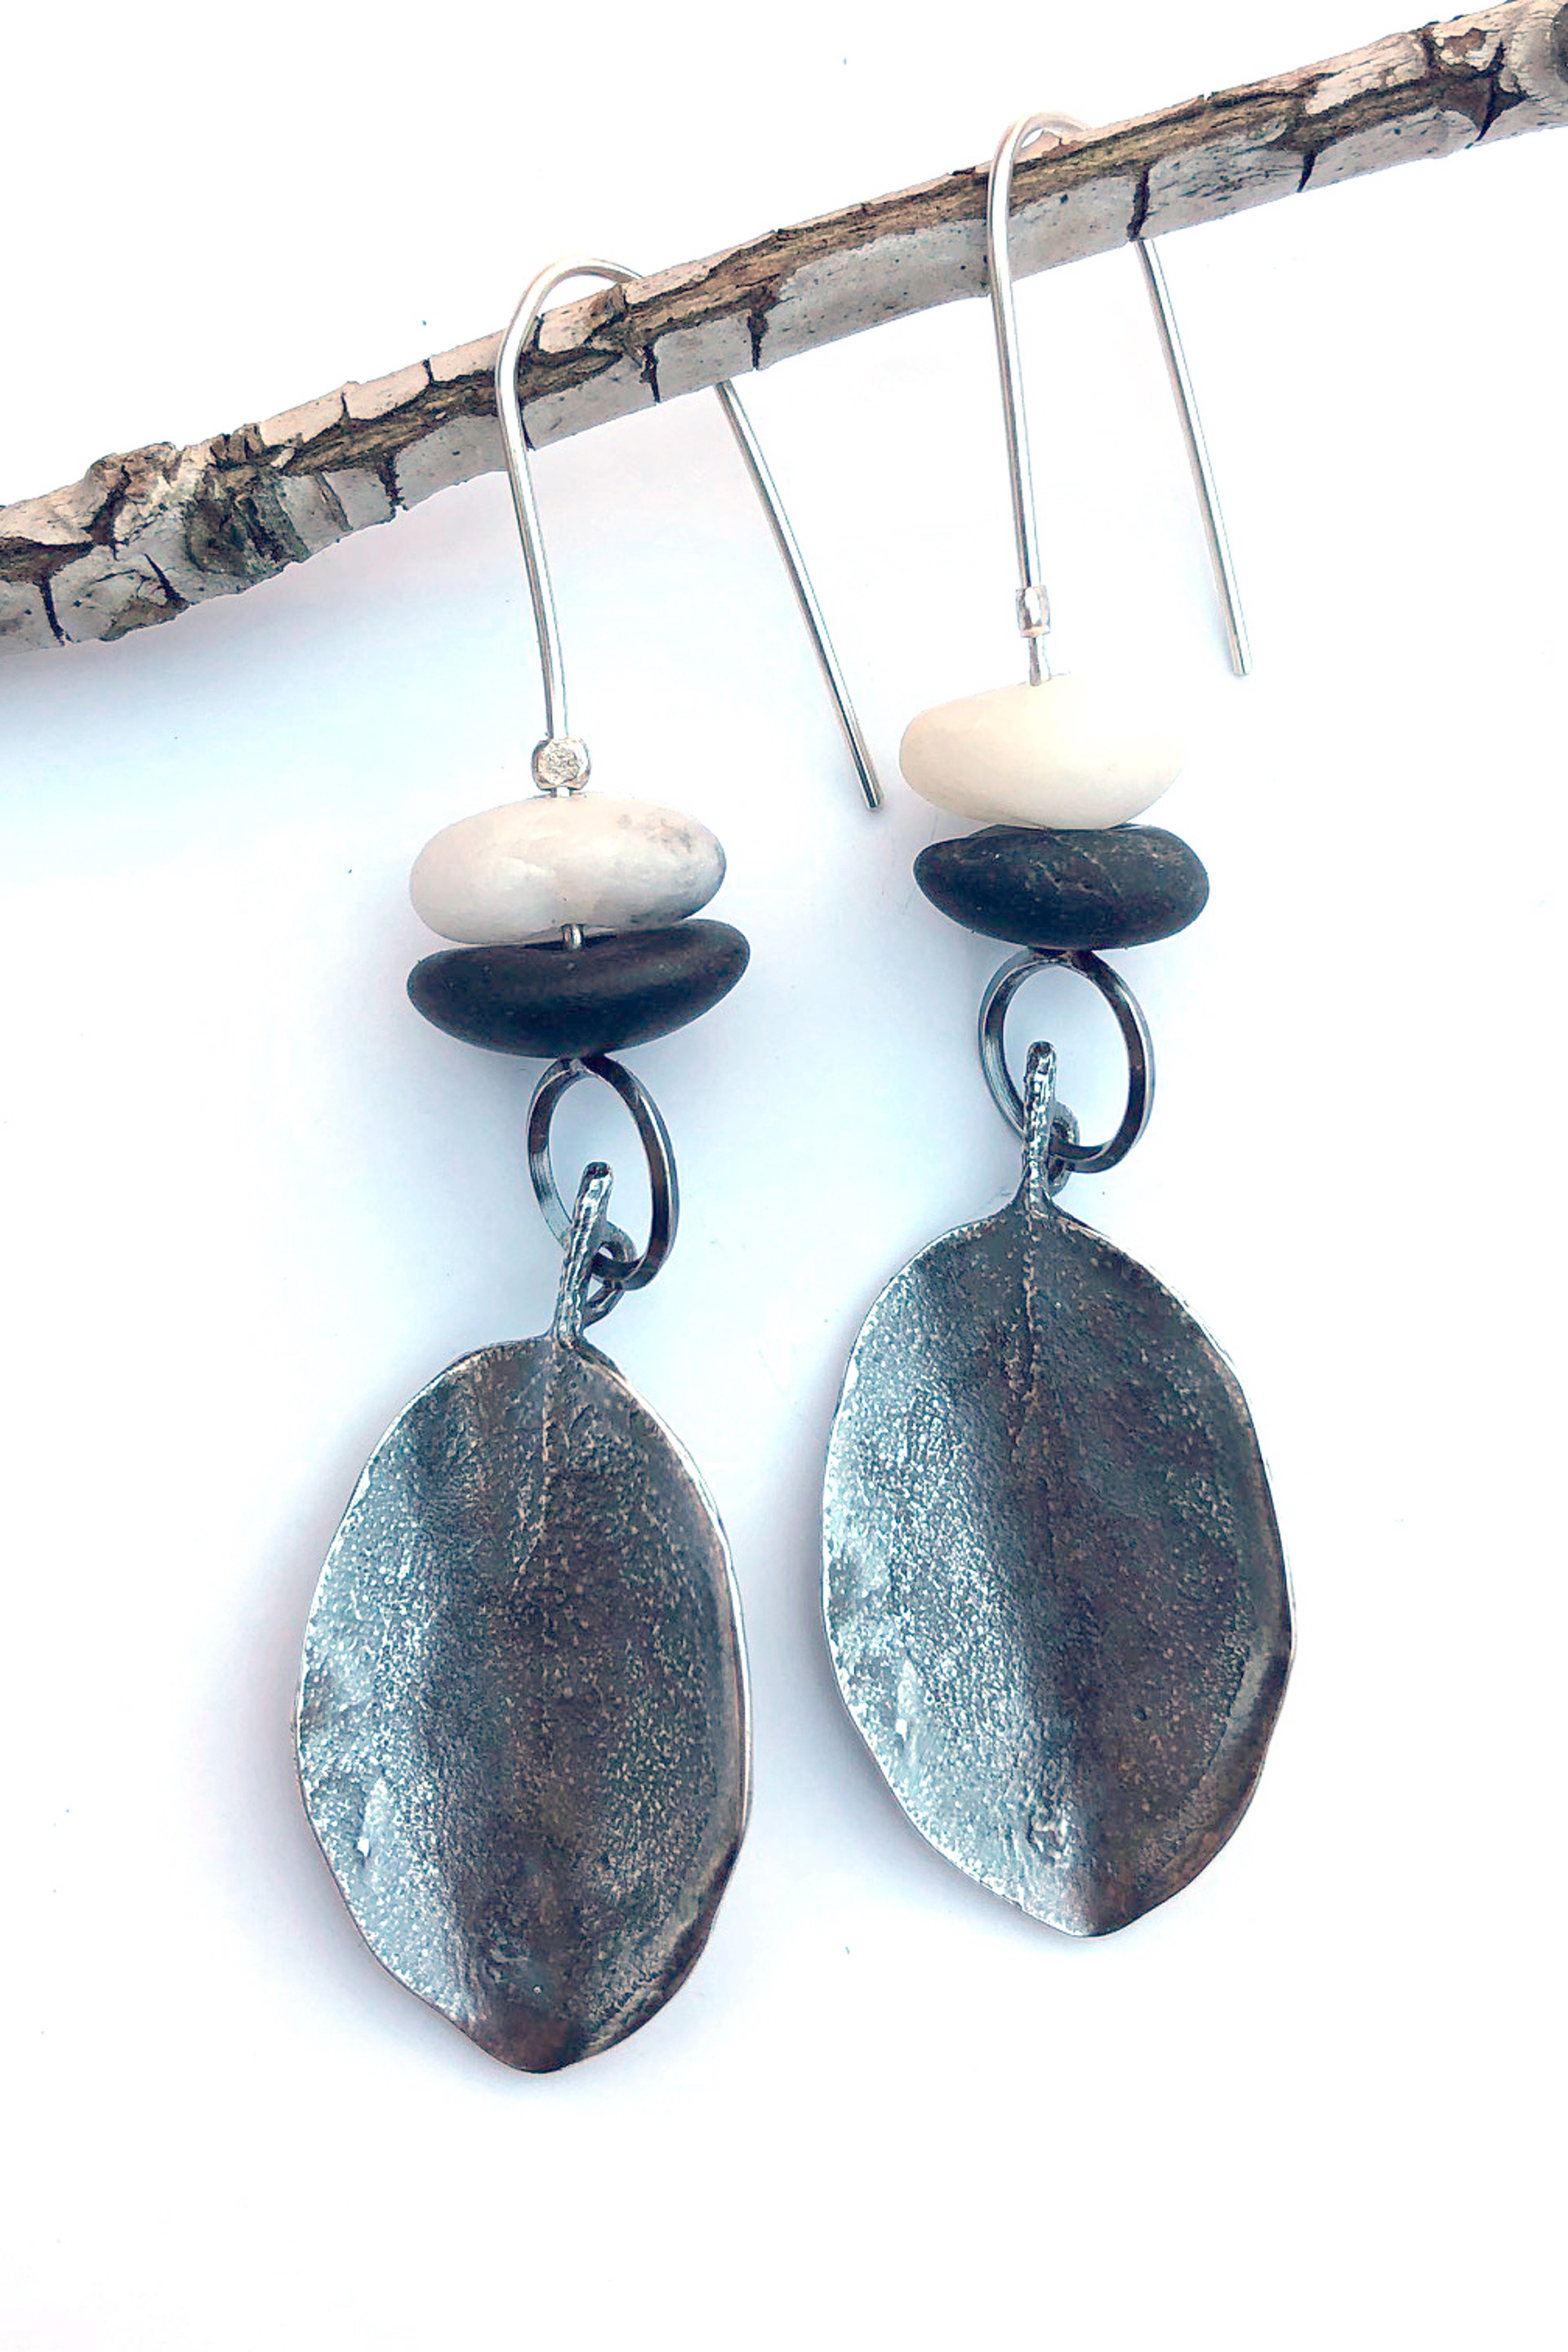 Medium Round Leaves with Stones by April Ottey